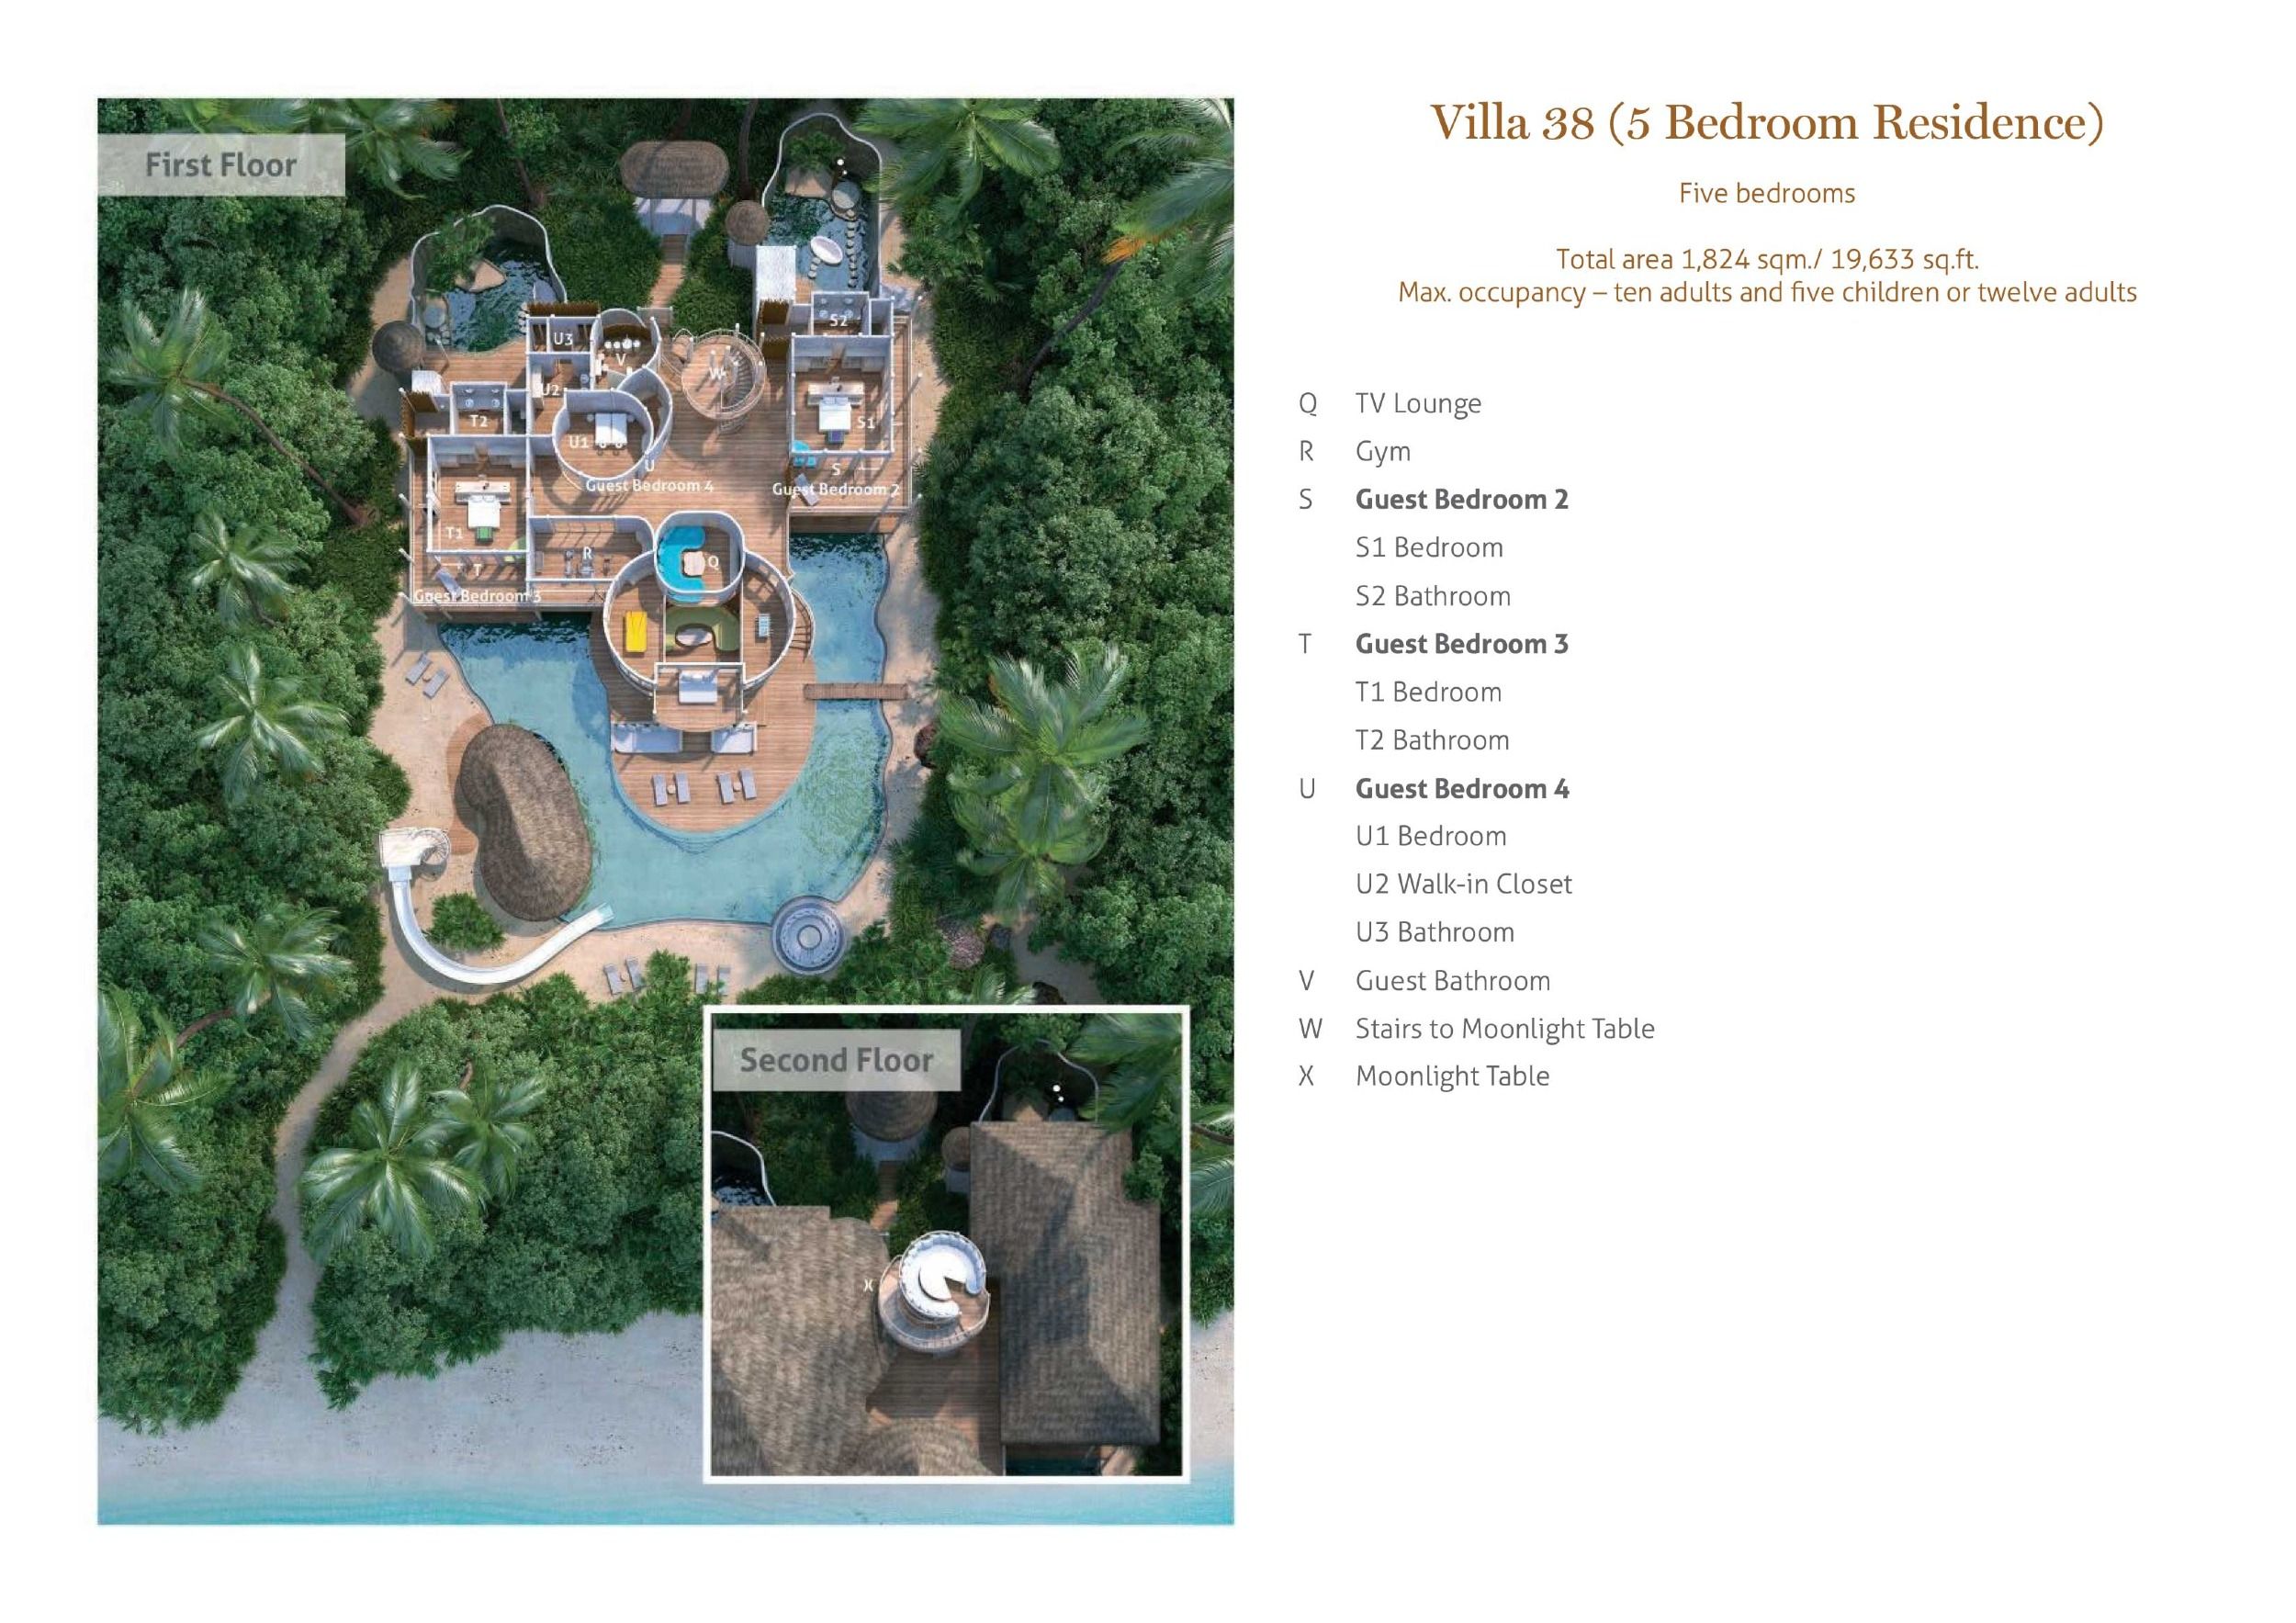 Villa 38 - Residence With Pool - Five Bedroom